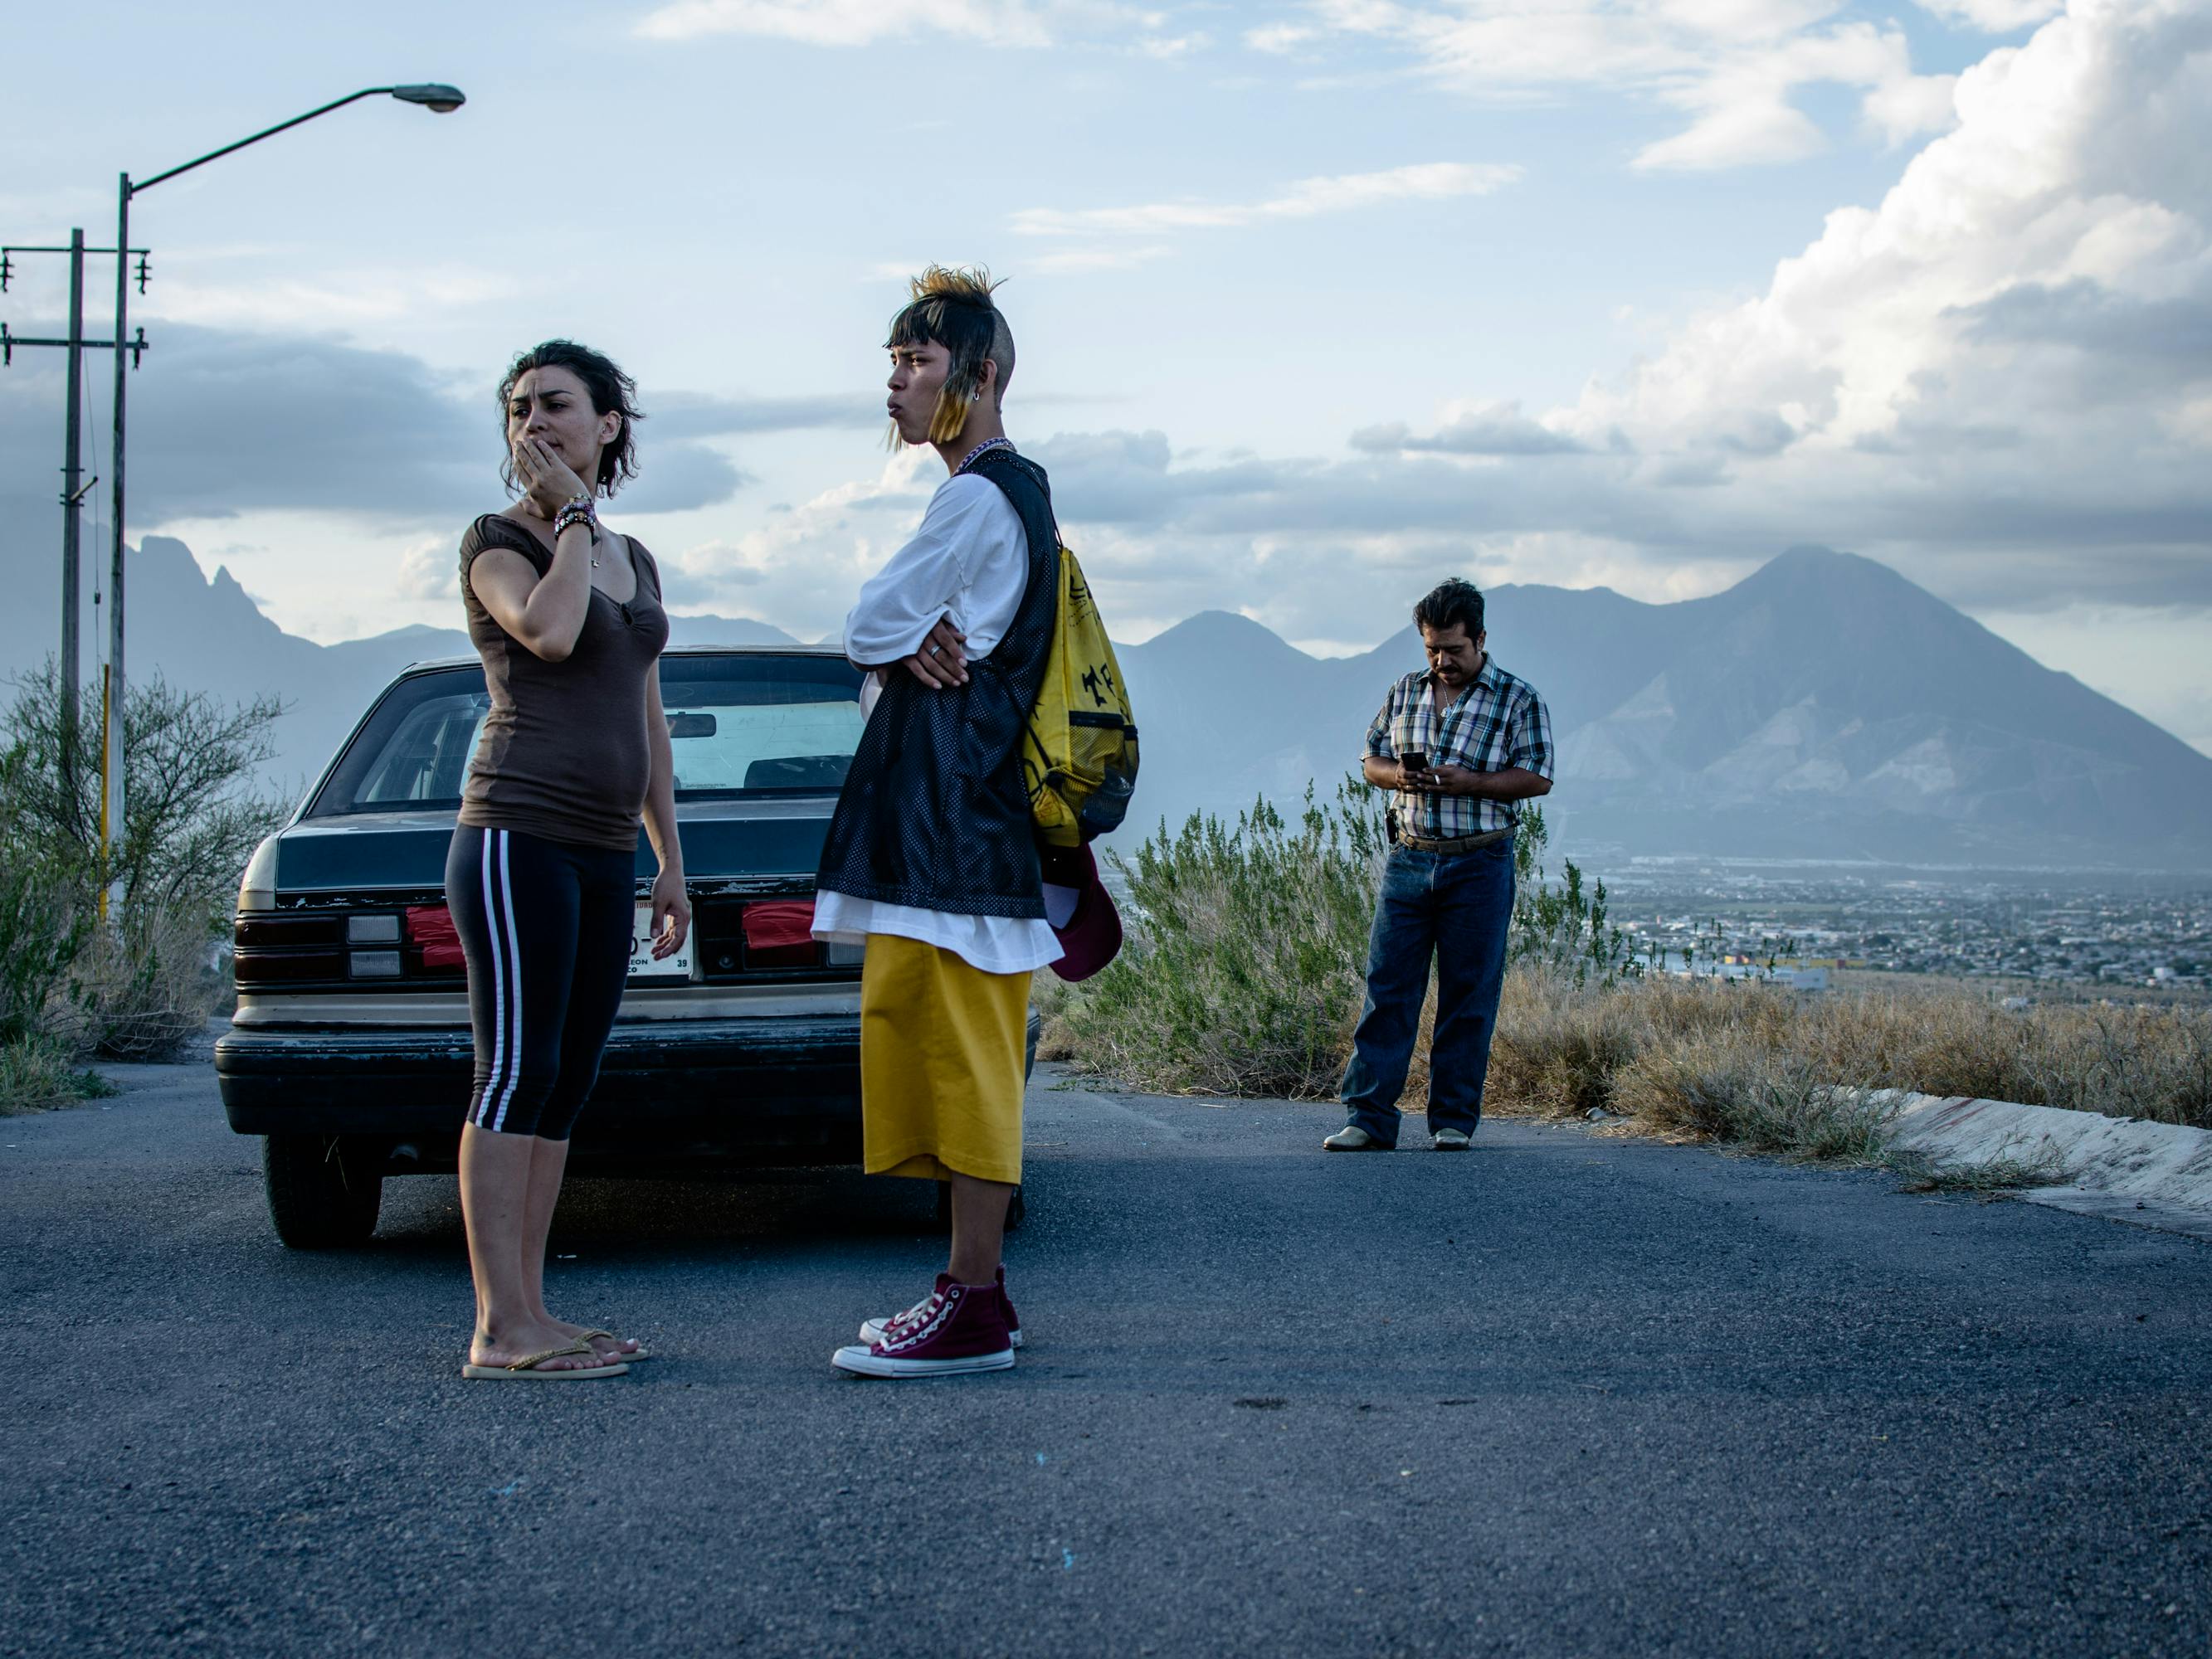 Three characters from Ya no estoy aquí stand against a mountain range by a black car.